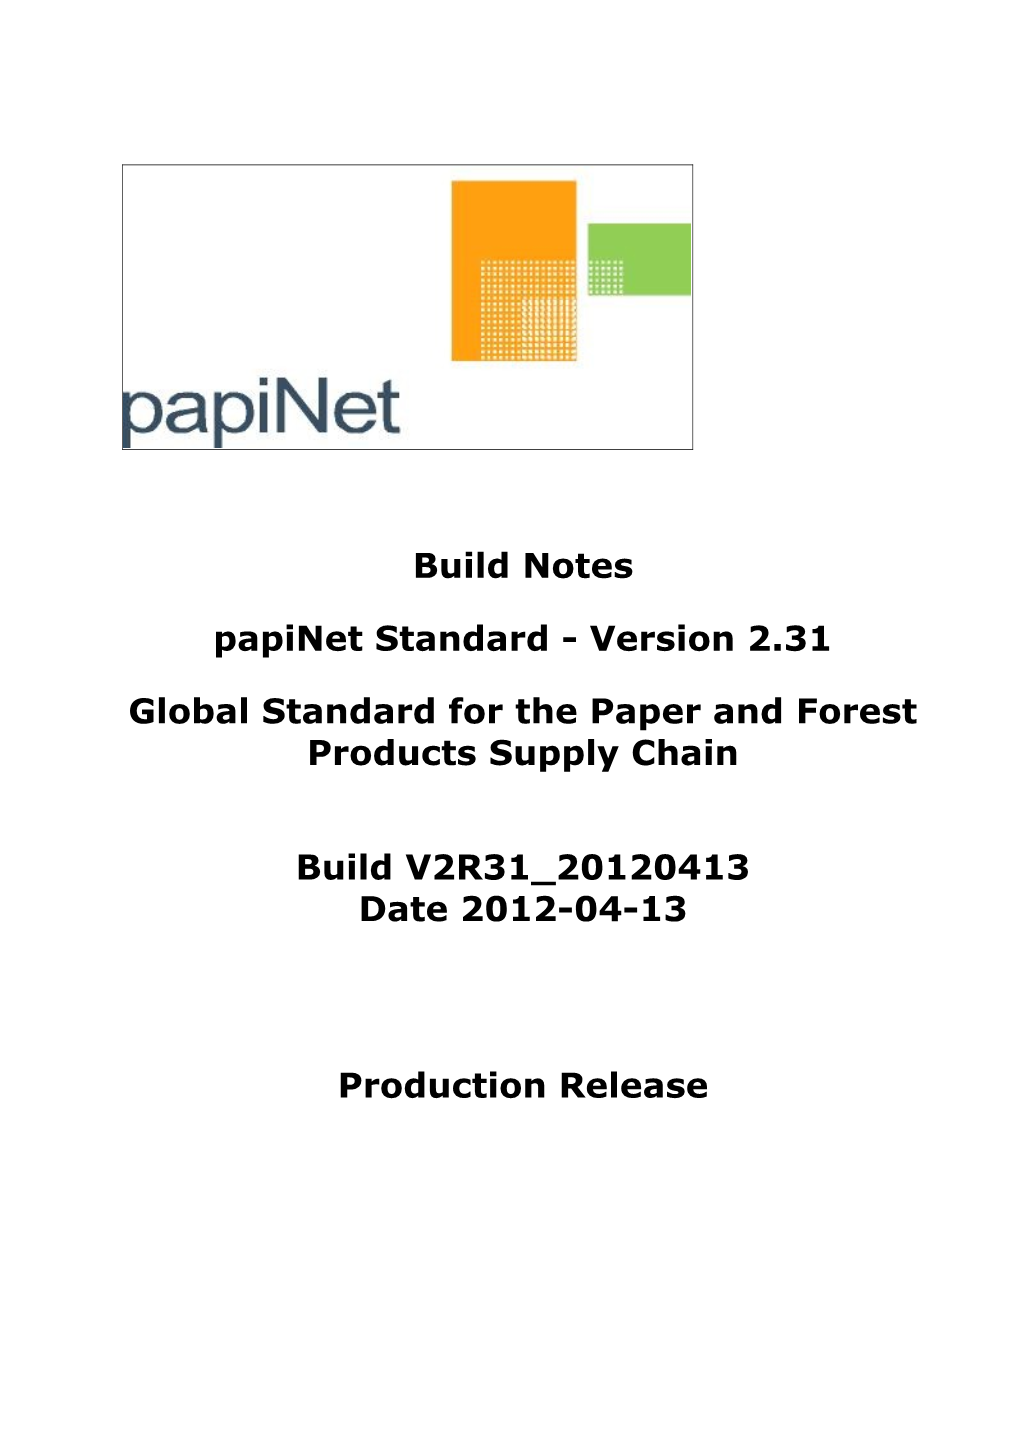 Global Standard for the Paper and Forest Products Supply Chain